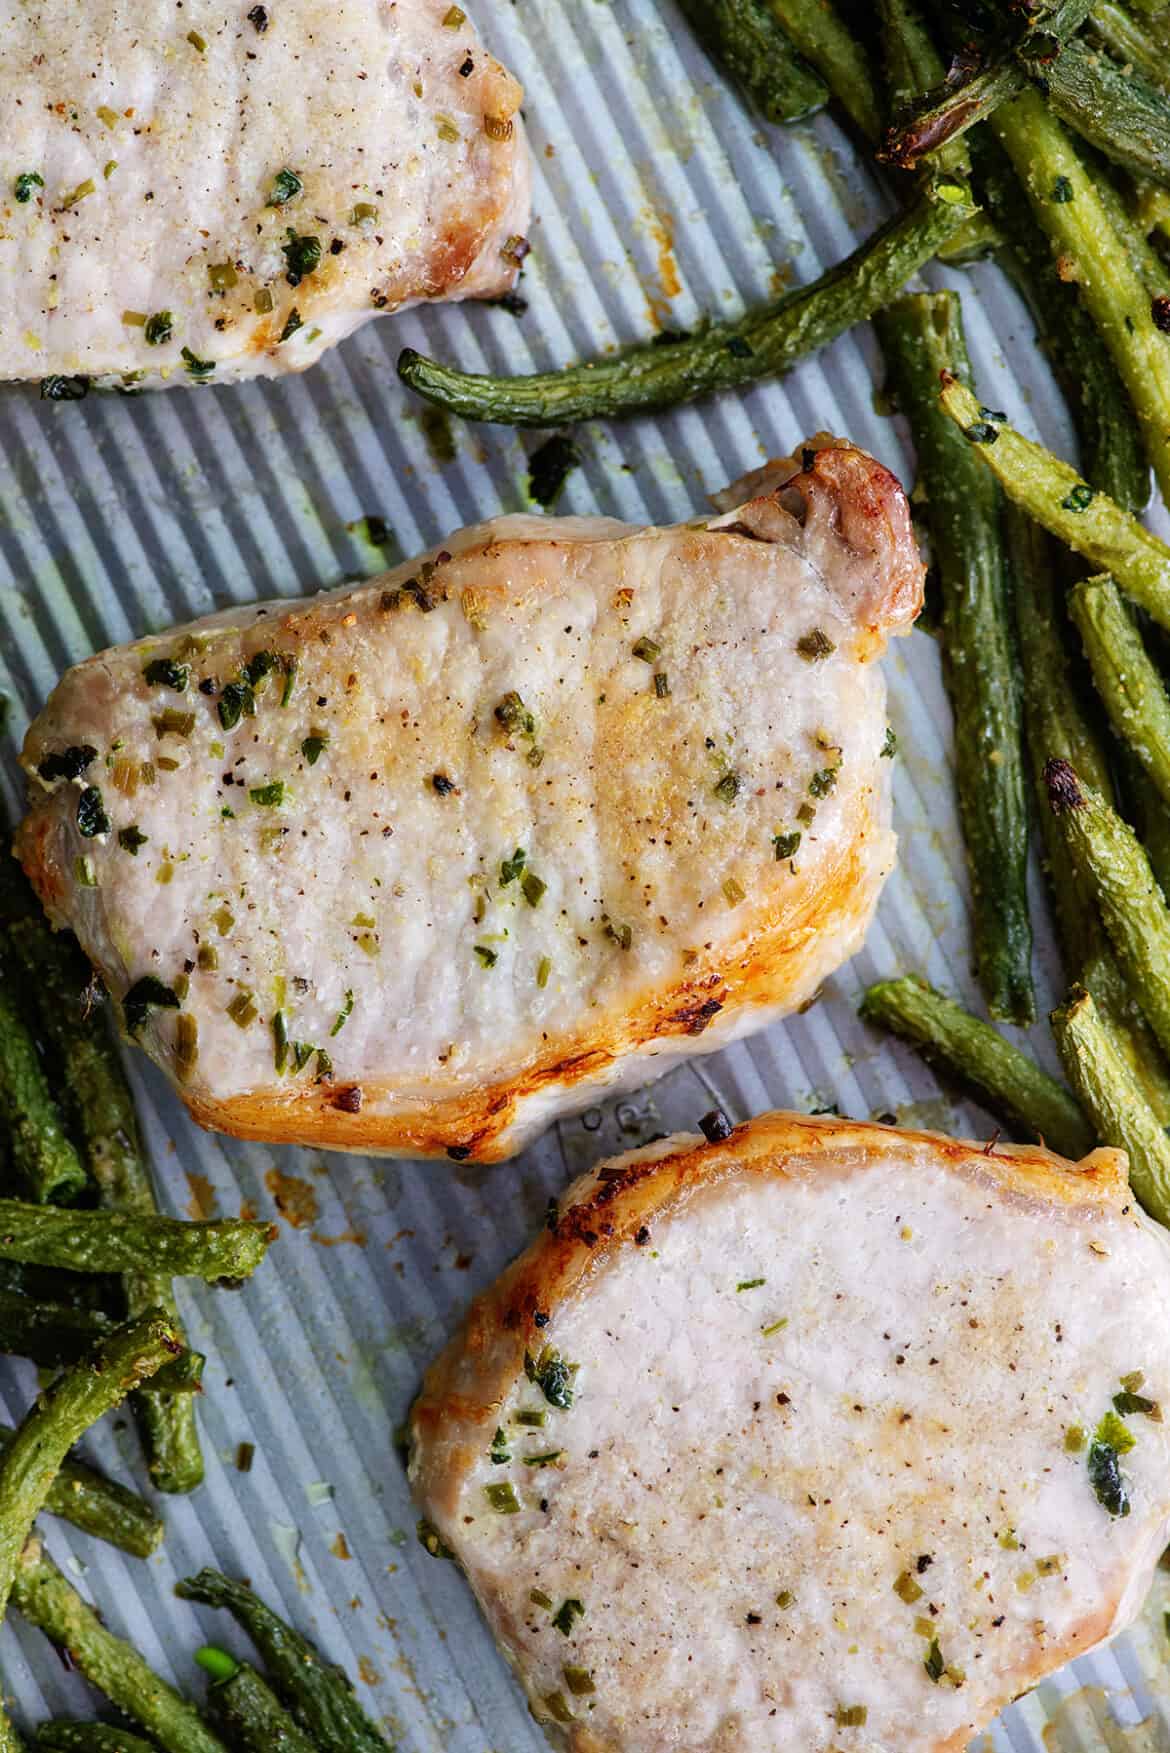 Baked Ranch Pork Chops & Green Beans - That Low Carb Life